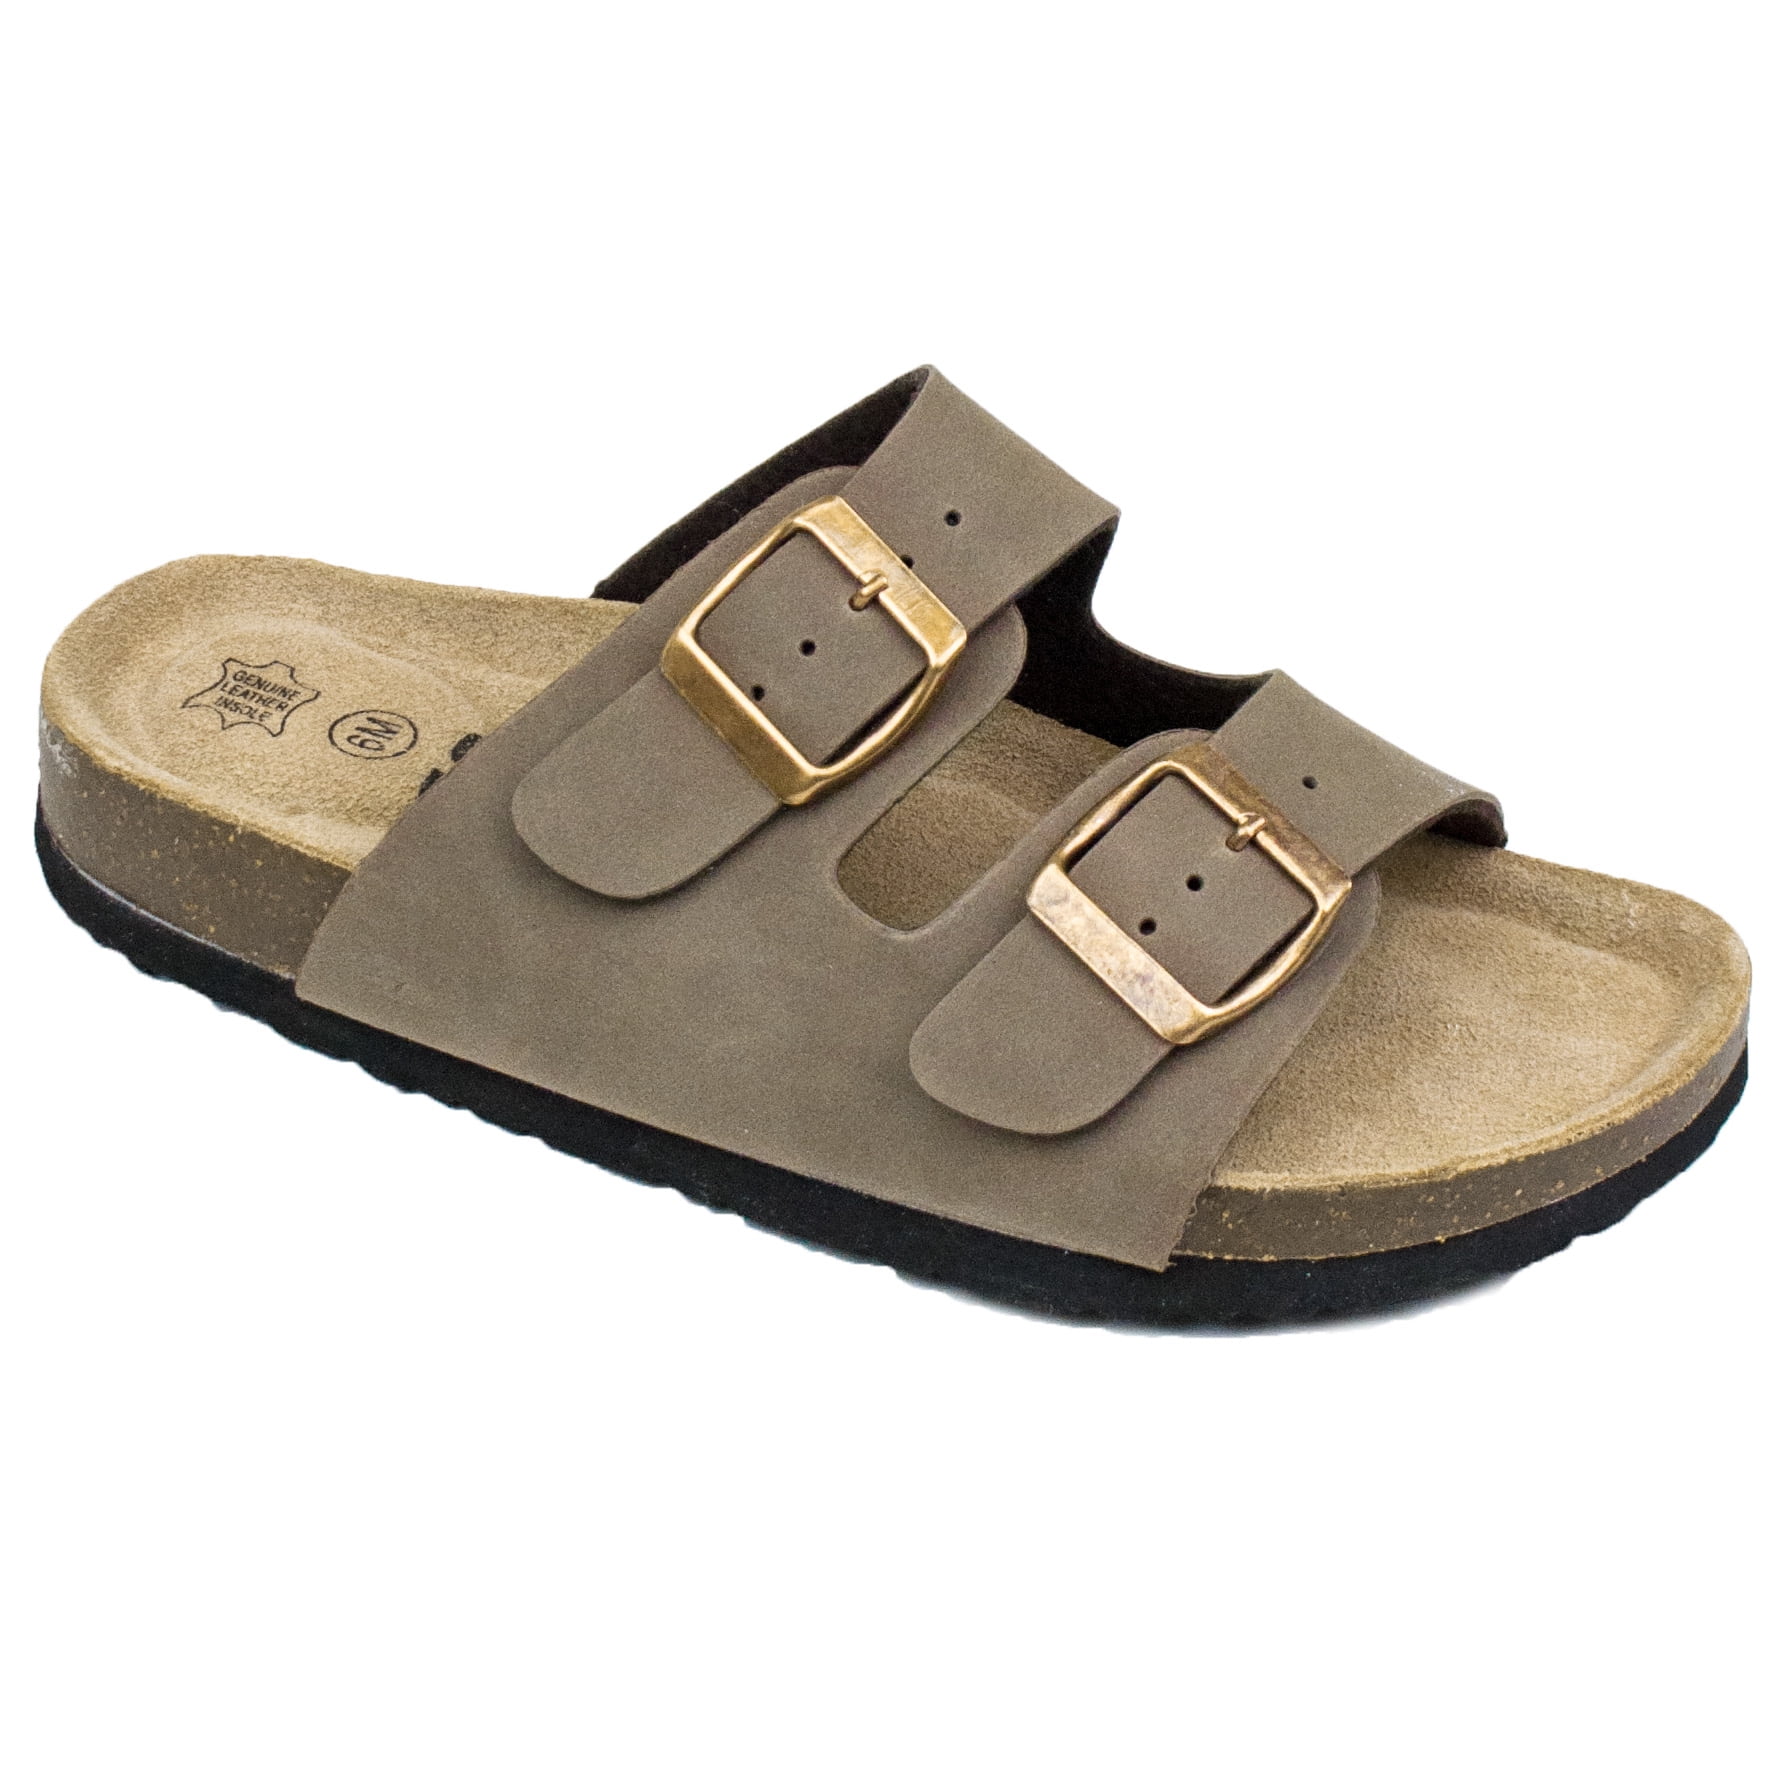 Eden and Co® - Genuine Leather Footwear - Ladies Crossover Sandals